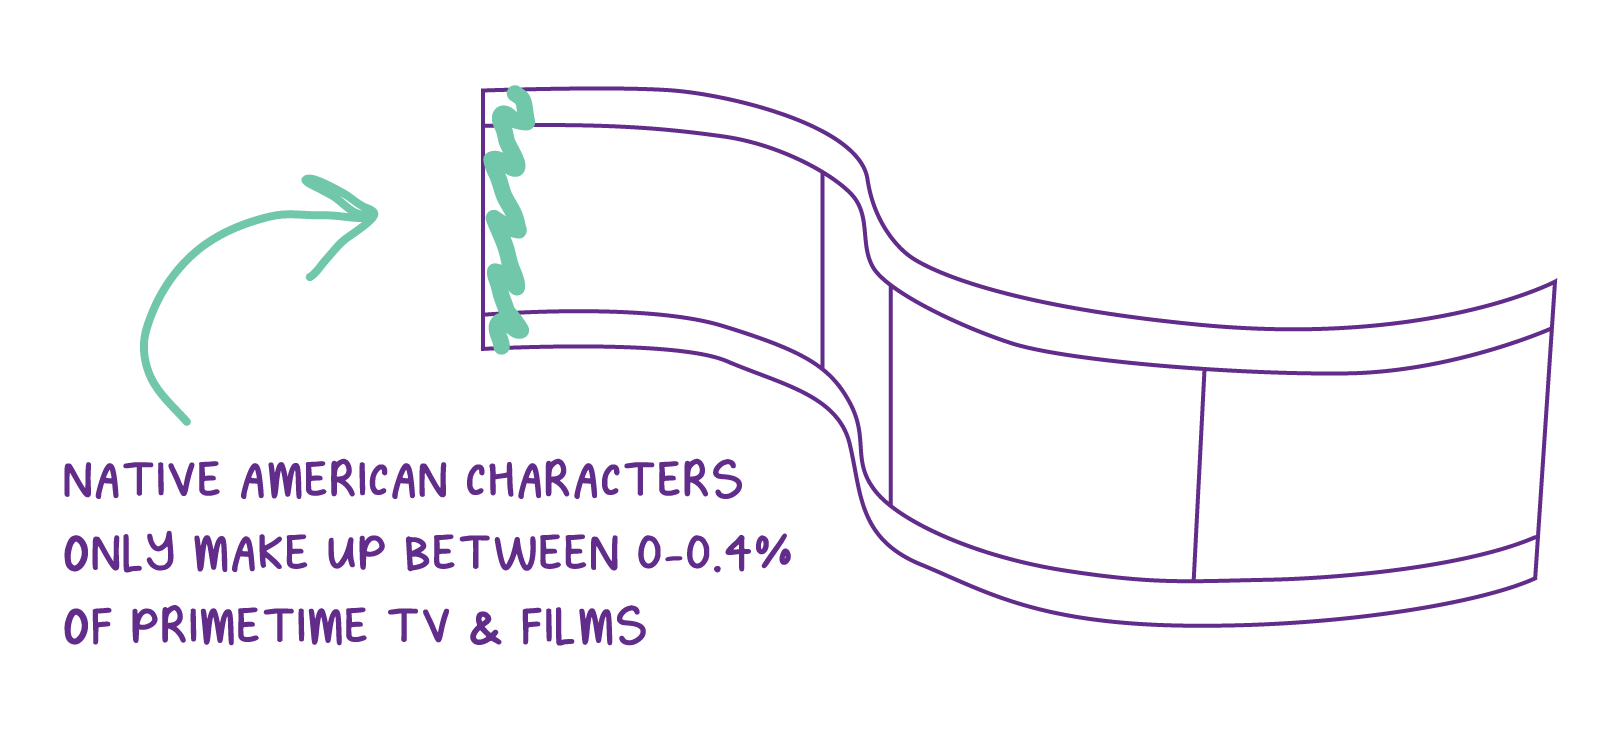 A roll of film. The text says "Native American characters only make up between 0-0.4% of primetime tv and films.